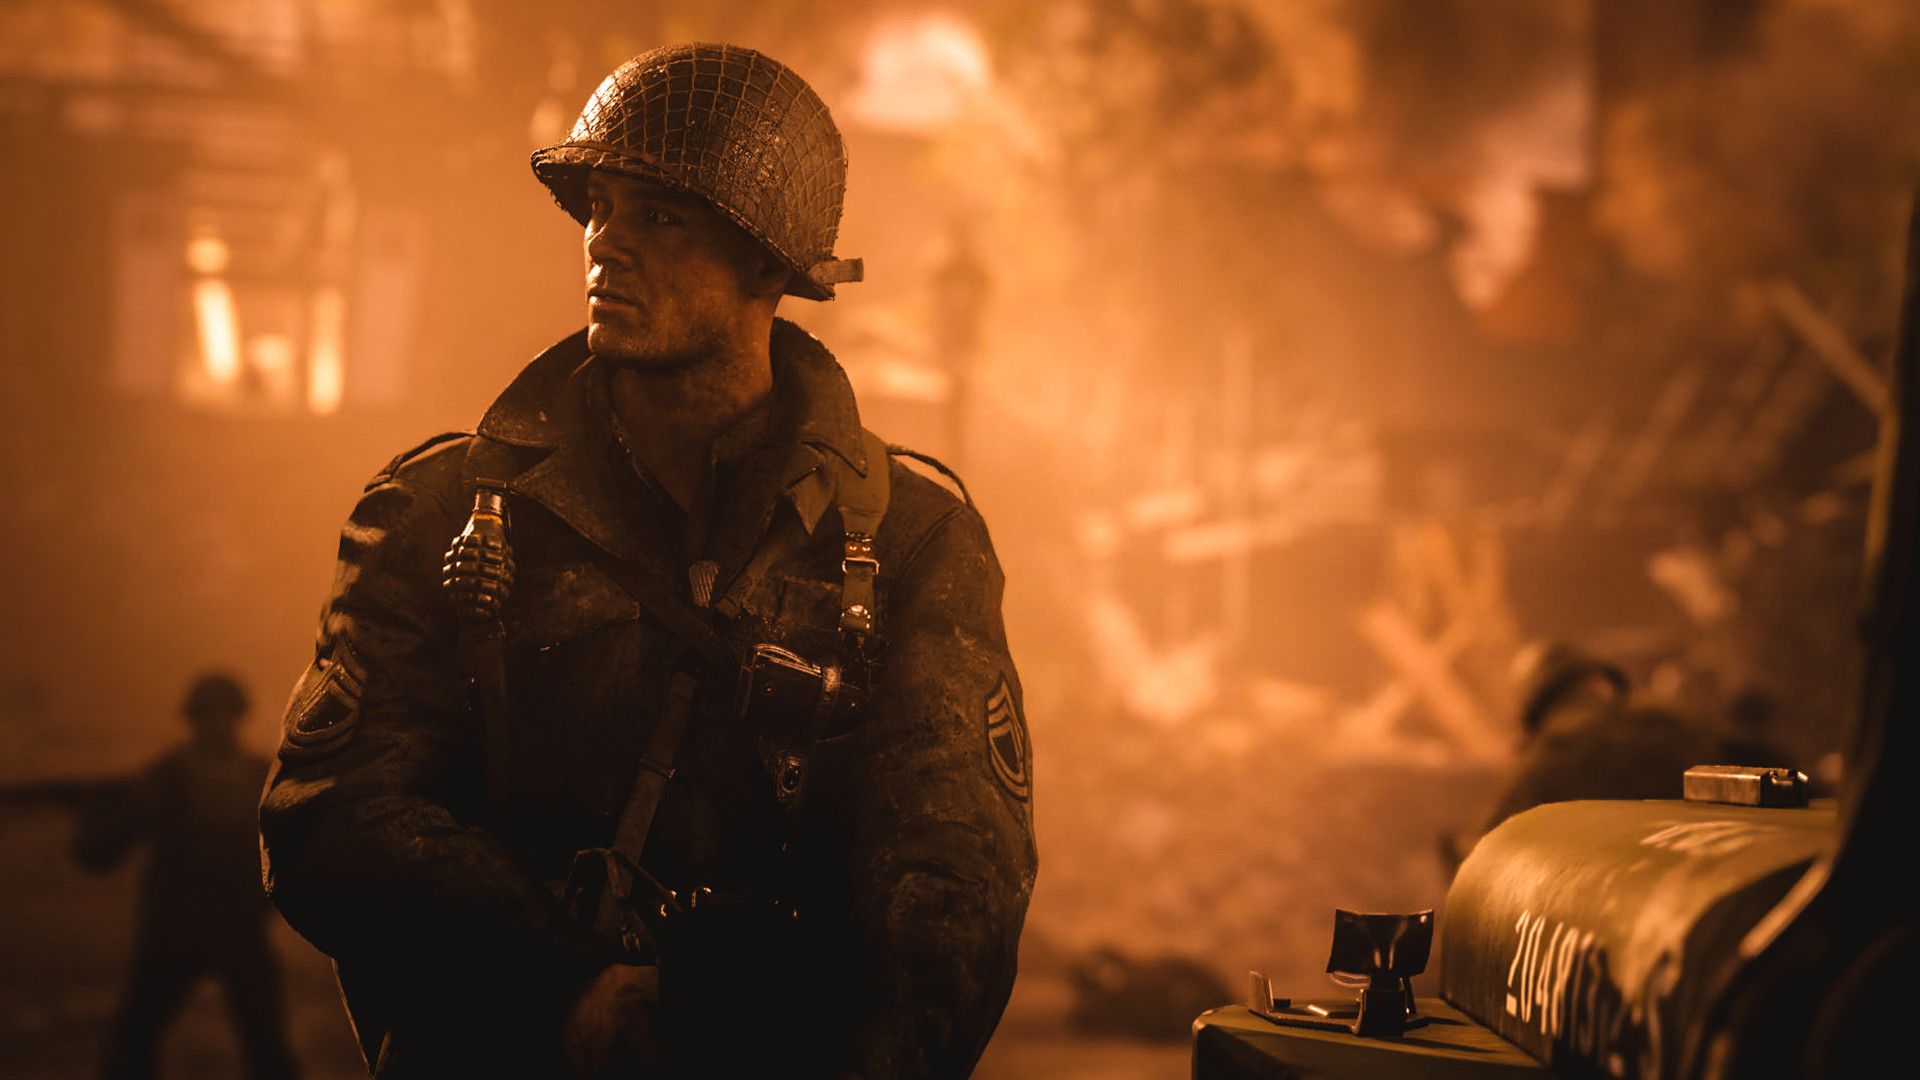 Call of Duty WW2: Vanguard is coming this year, according to multiple reports